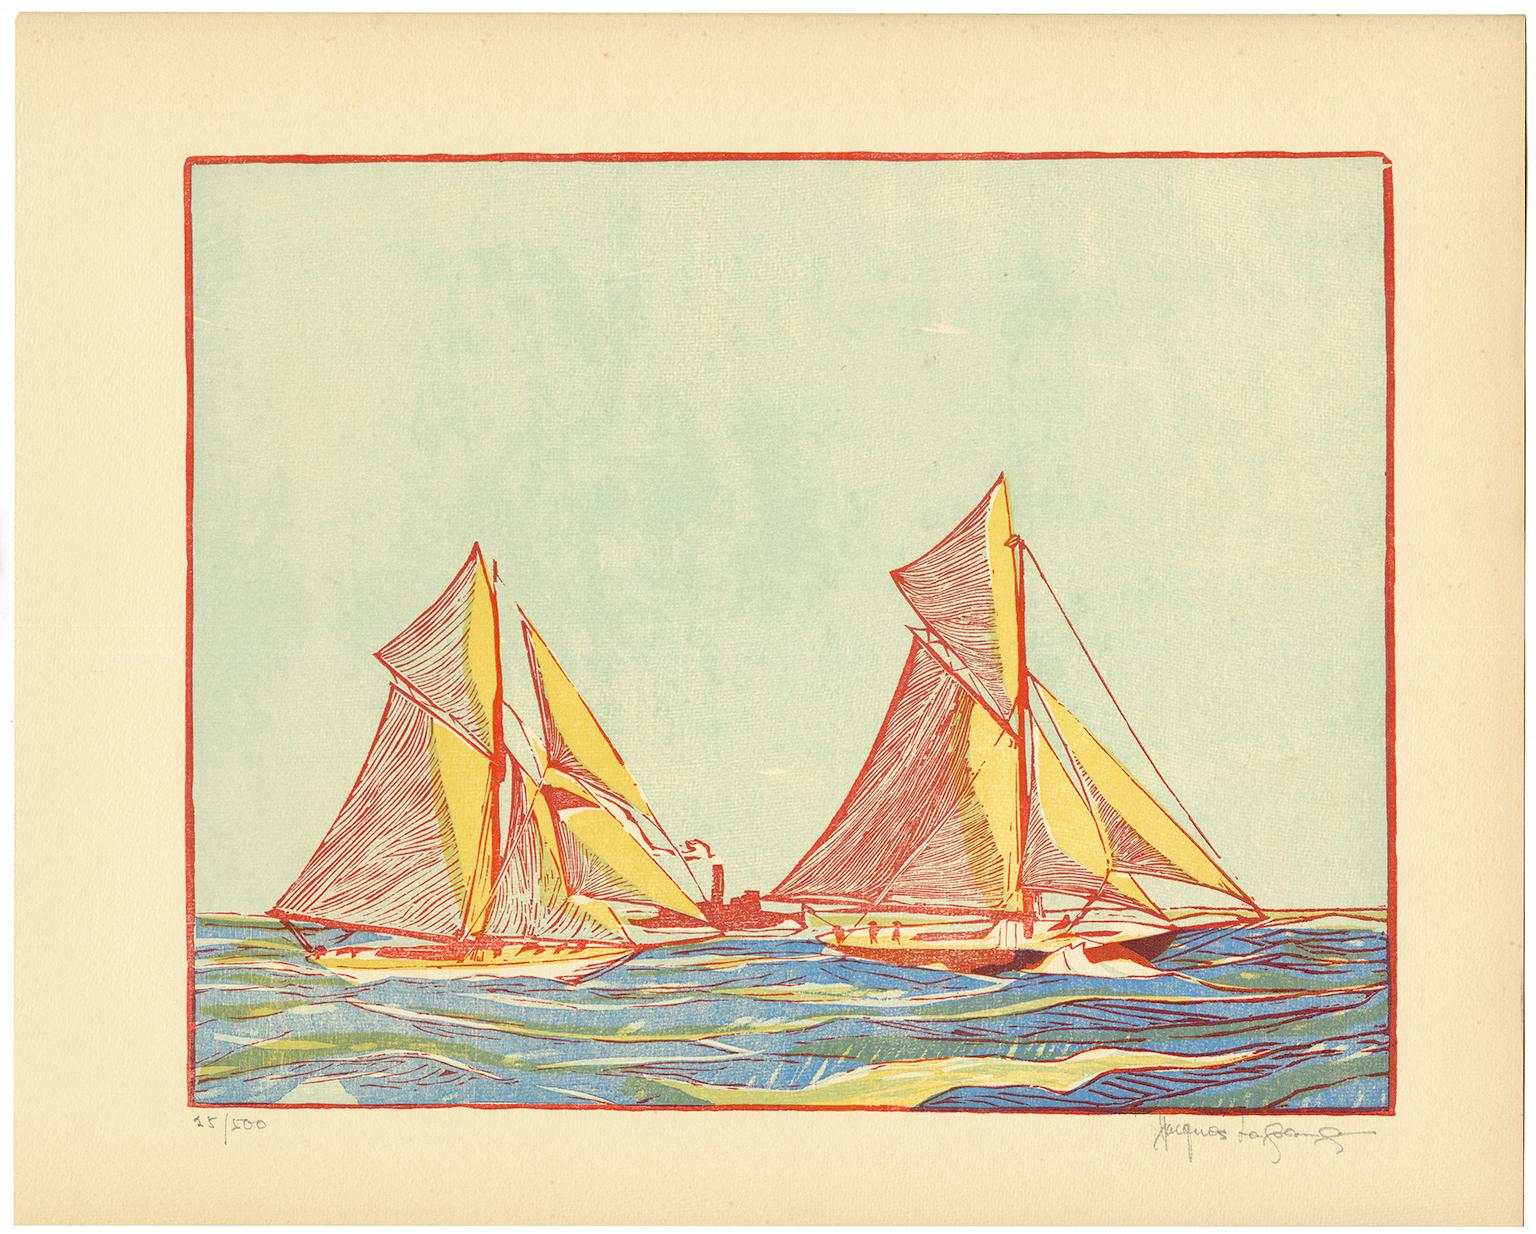 'After the Start' — America's Cup, 1893 - Print by Jacques La Grange